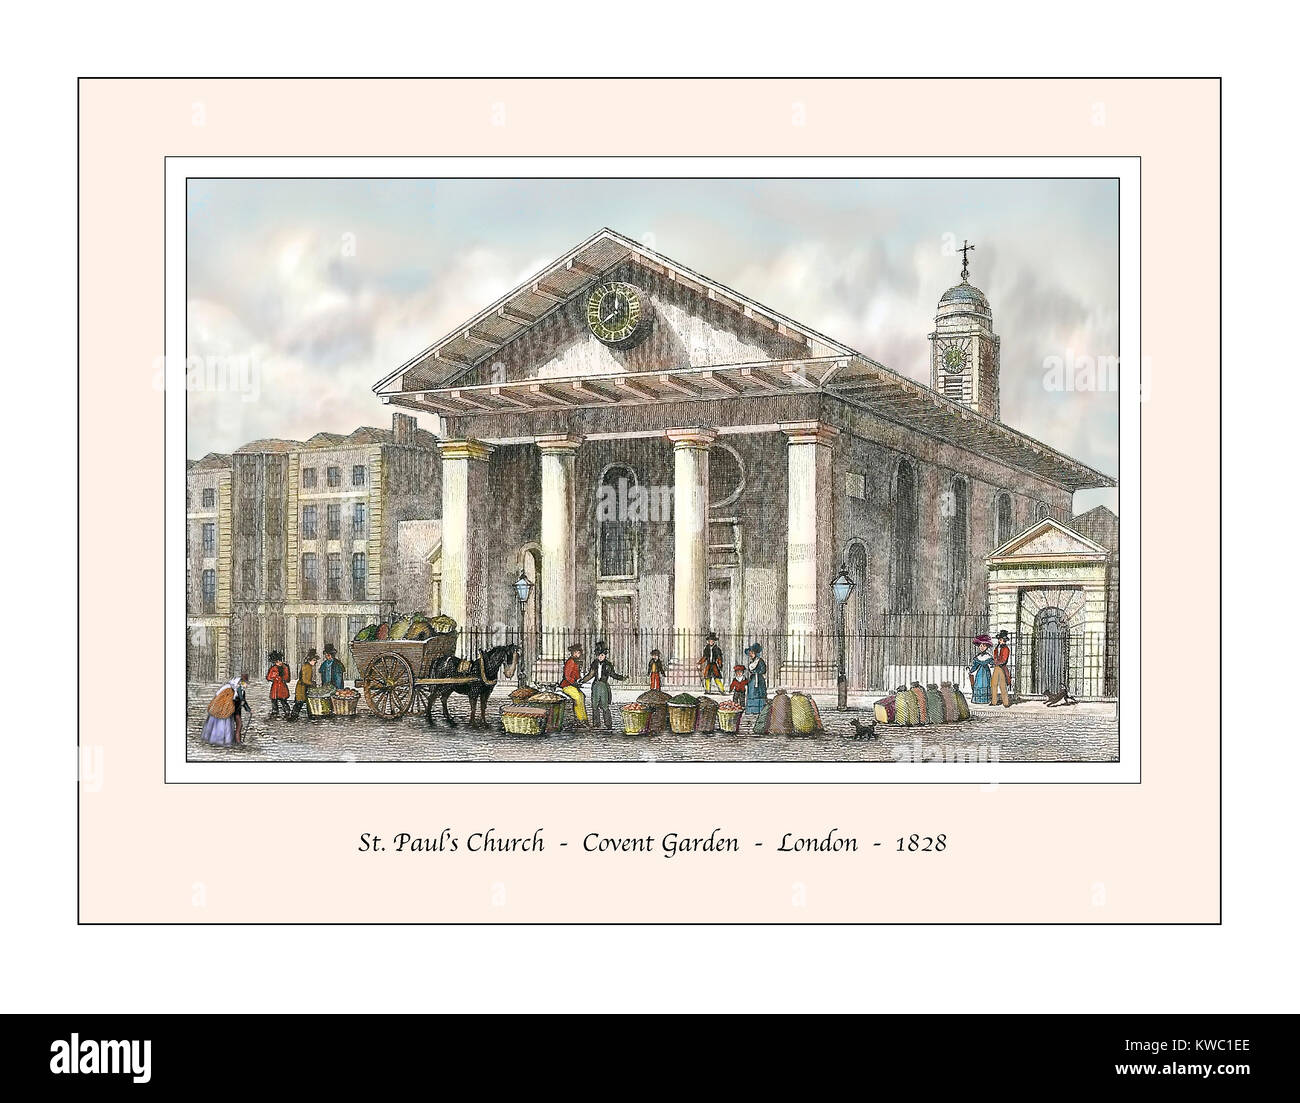 St. Paul's Church Covent Garden Original Design based on a 19th century Engraving Stock Photo